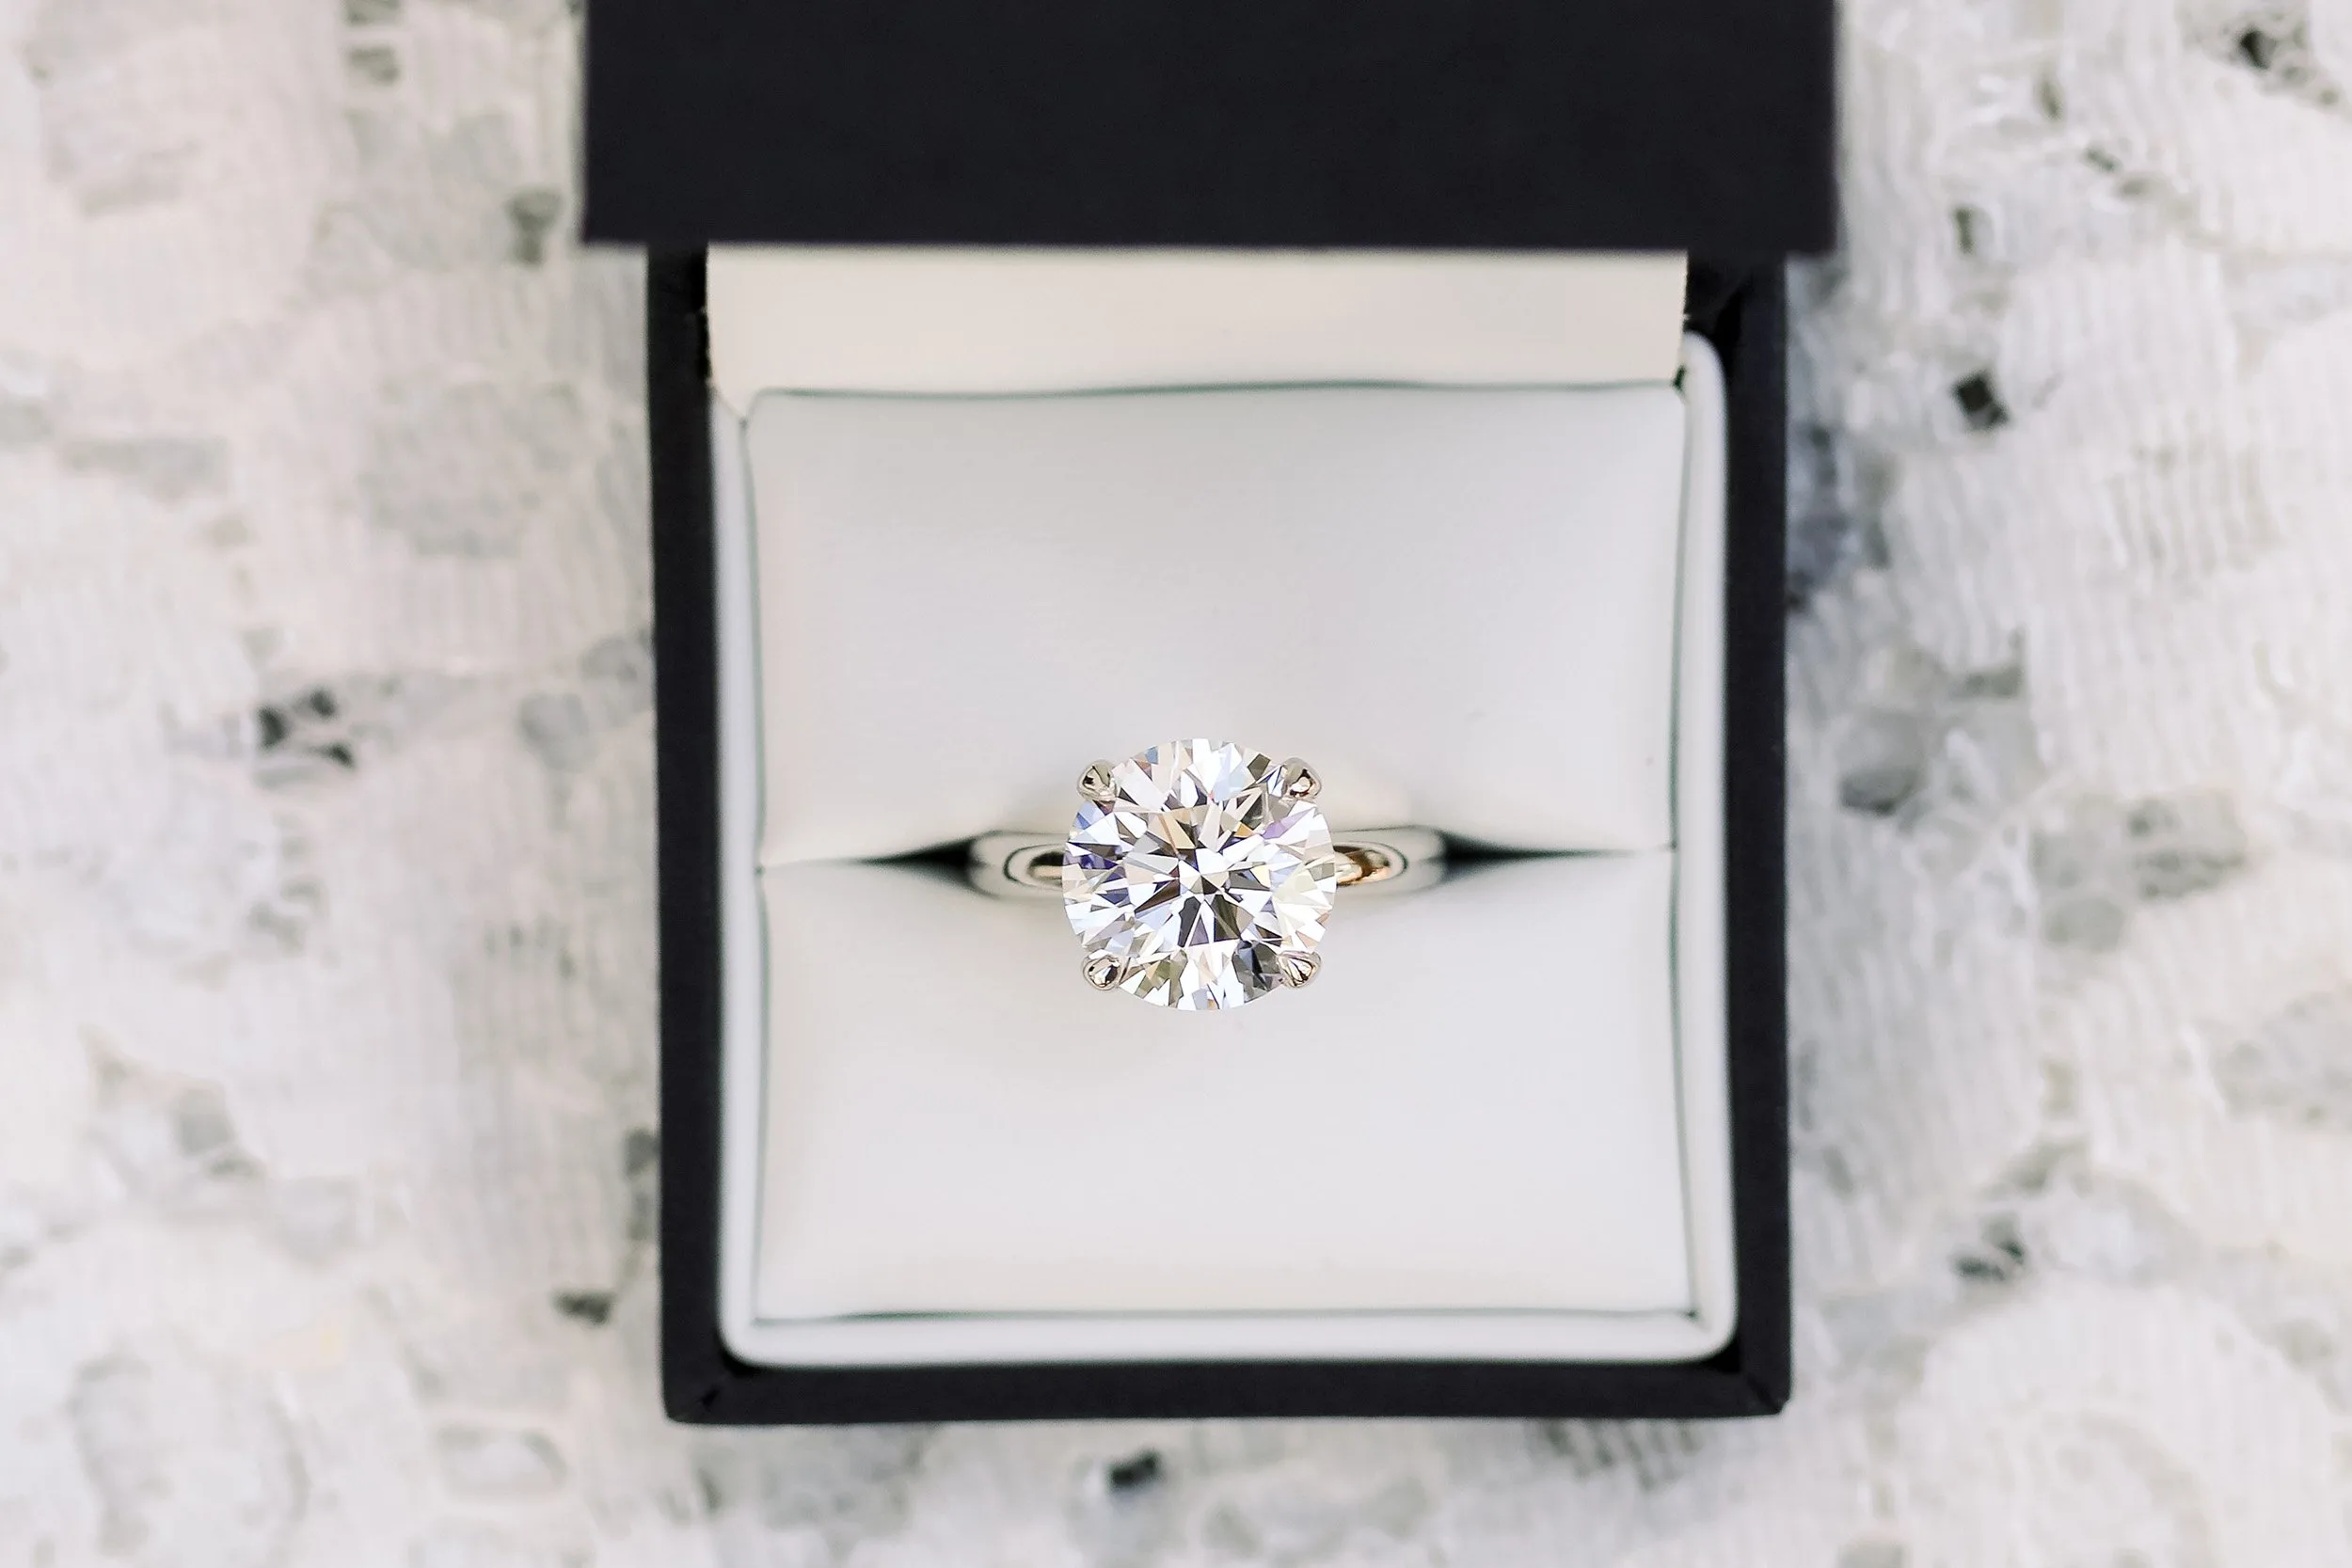 Affordable Lab Diamond Engagement Rings & Wedding Jewelry